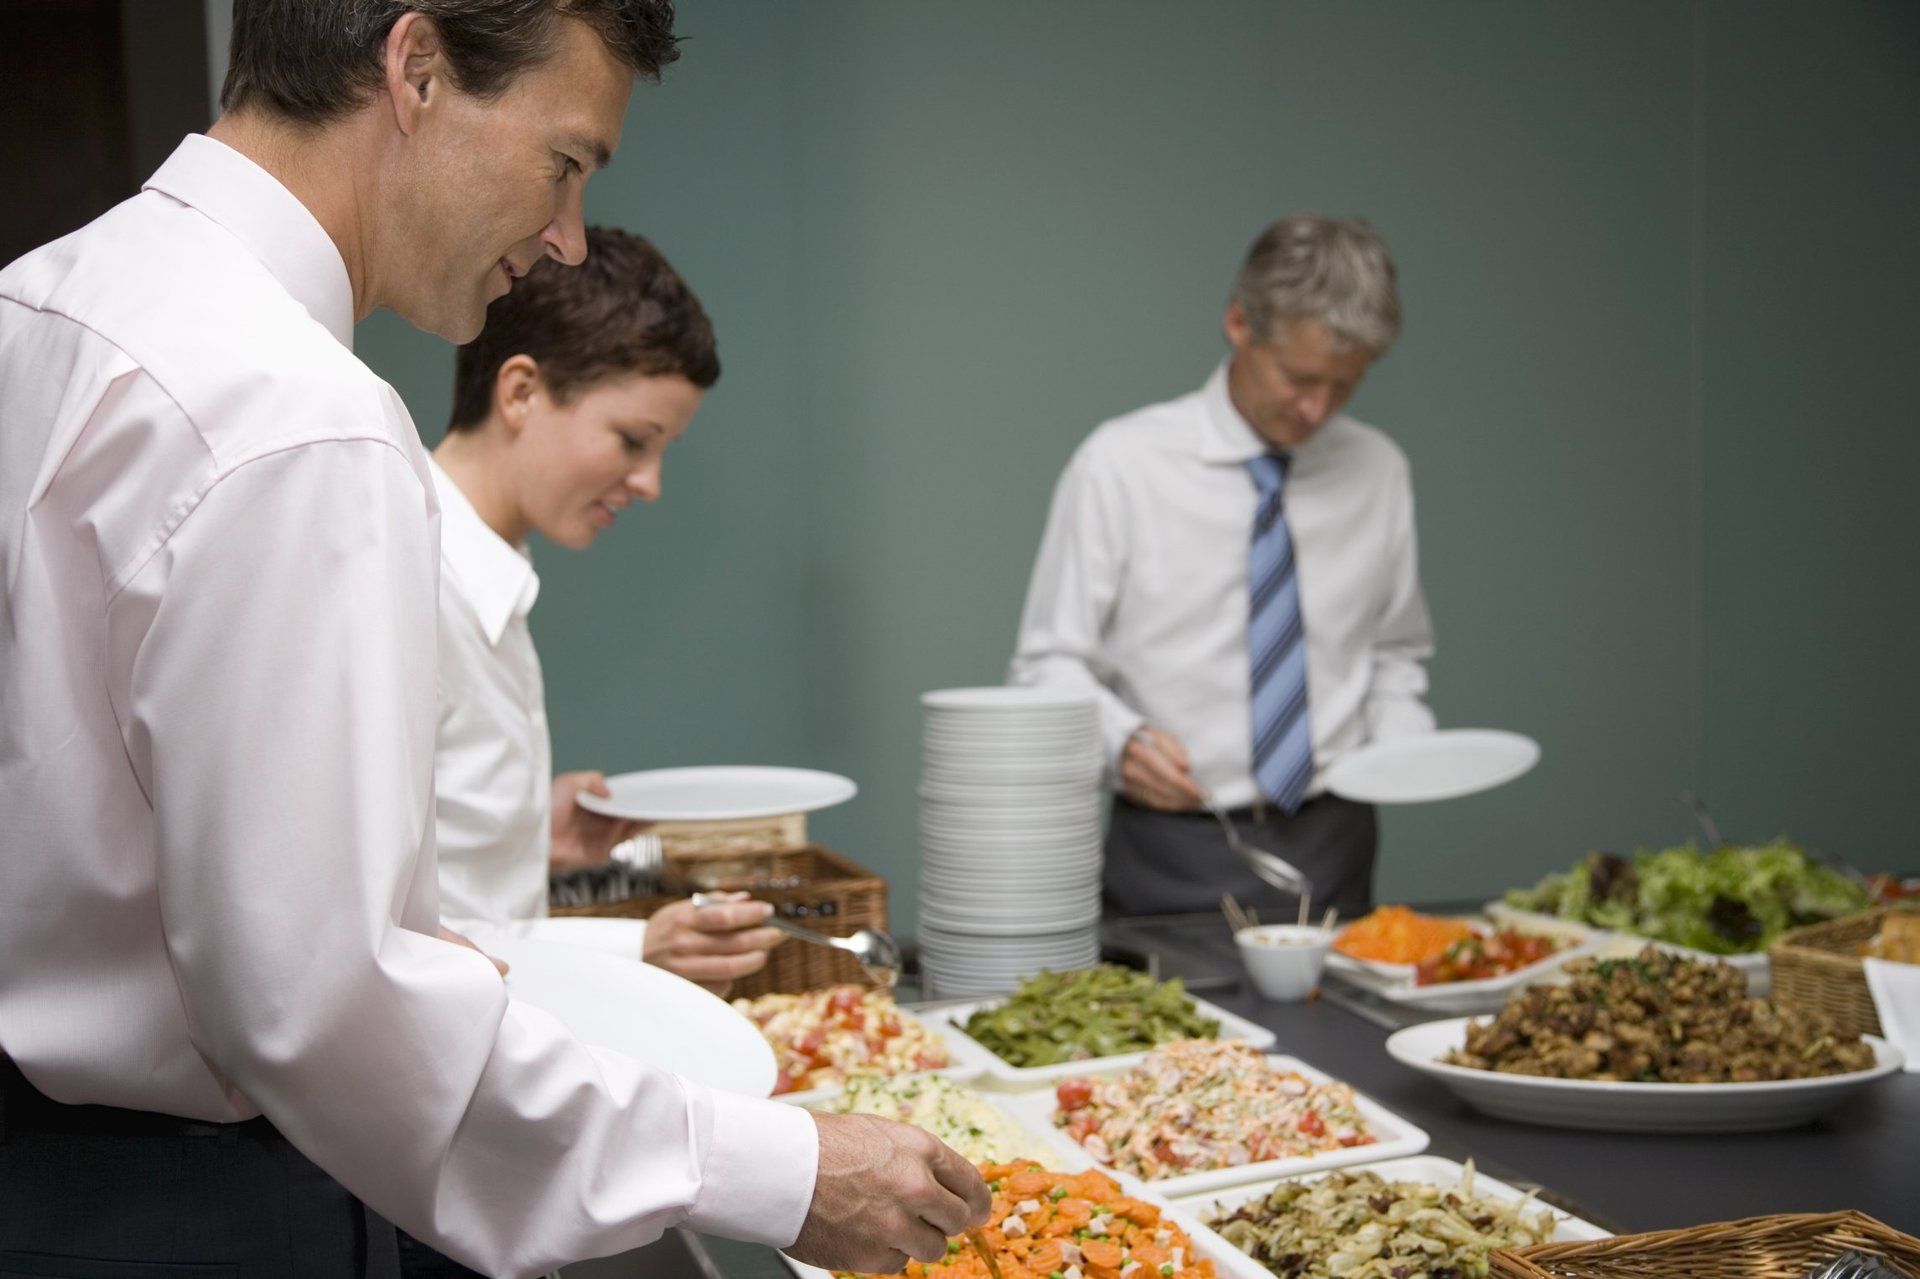 Two men and one woman, dressed in business attire, selecting food from a smorgasbord(buffet)